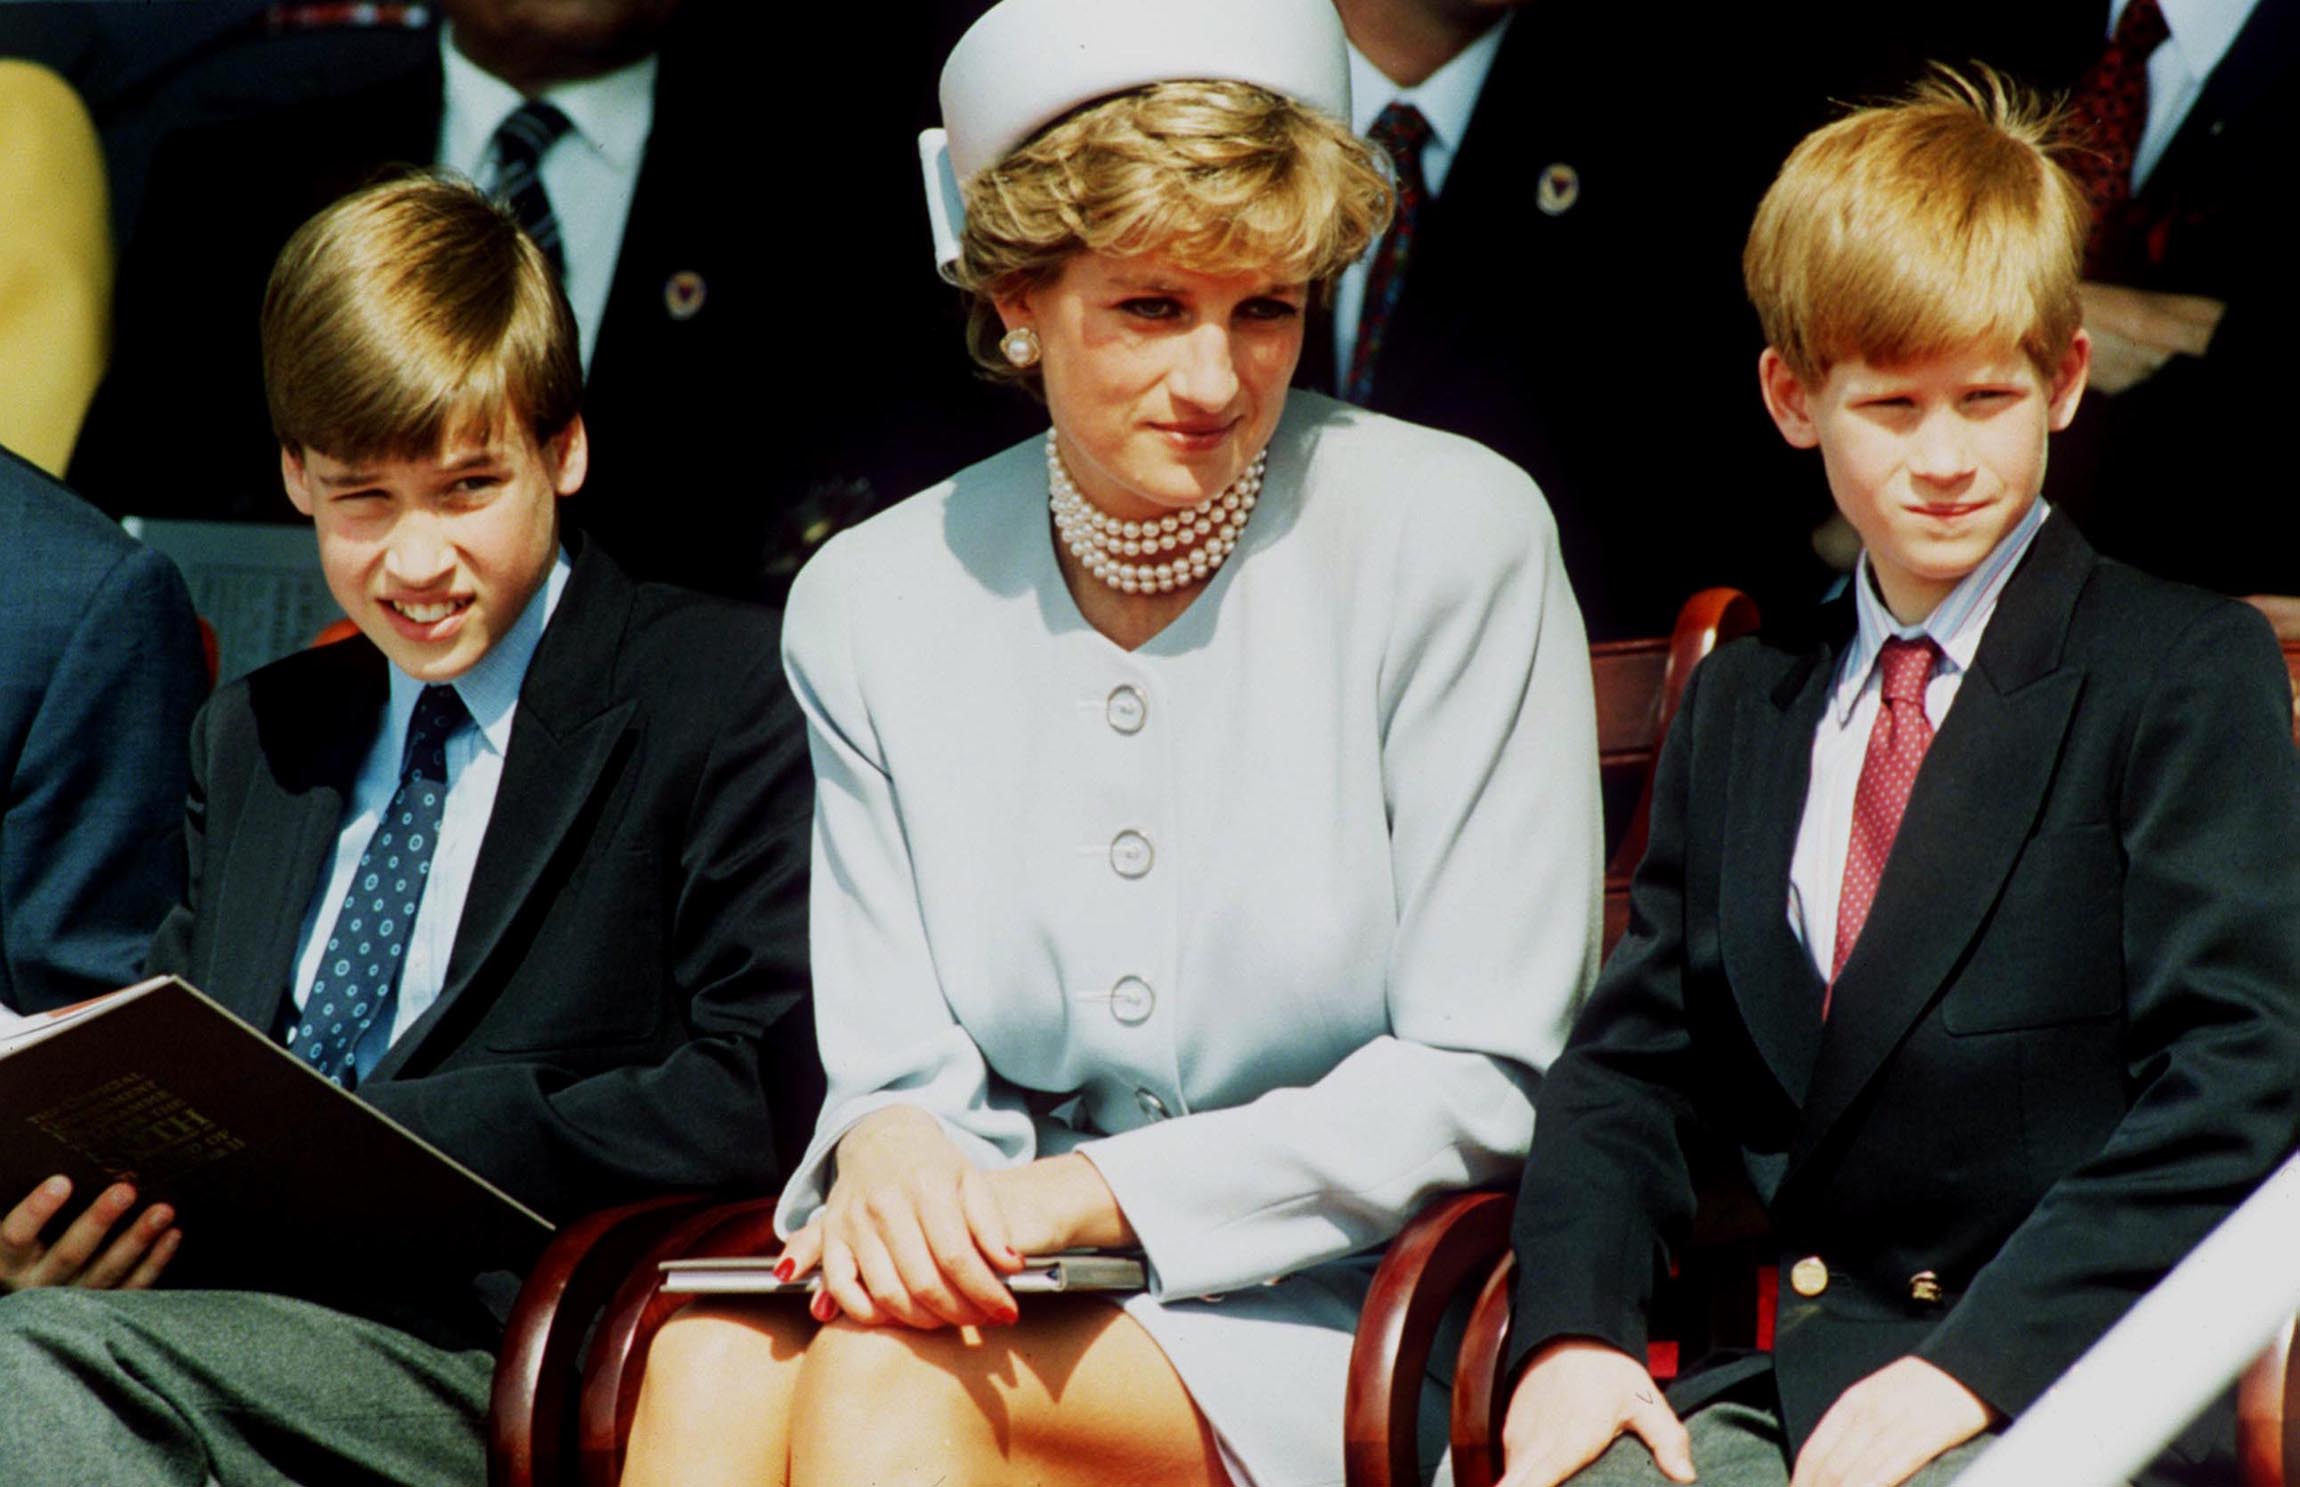  Princess Diana with her sons Prince William and Prince Harry attend the Heads of State VE Remembrance Service in Hyde Park on May 7, 1995 in London, England. | Getty Images